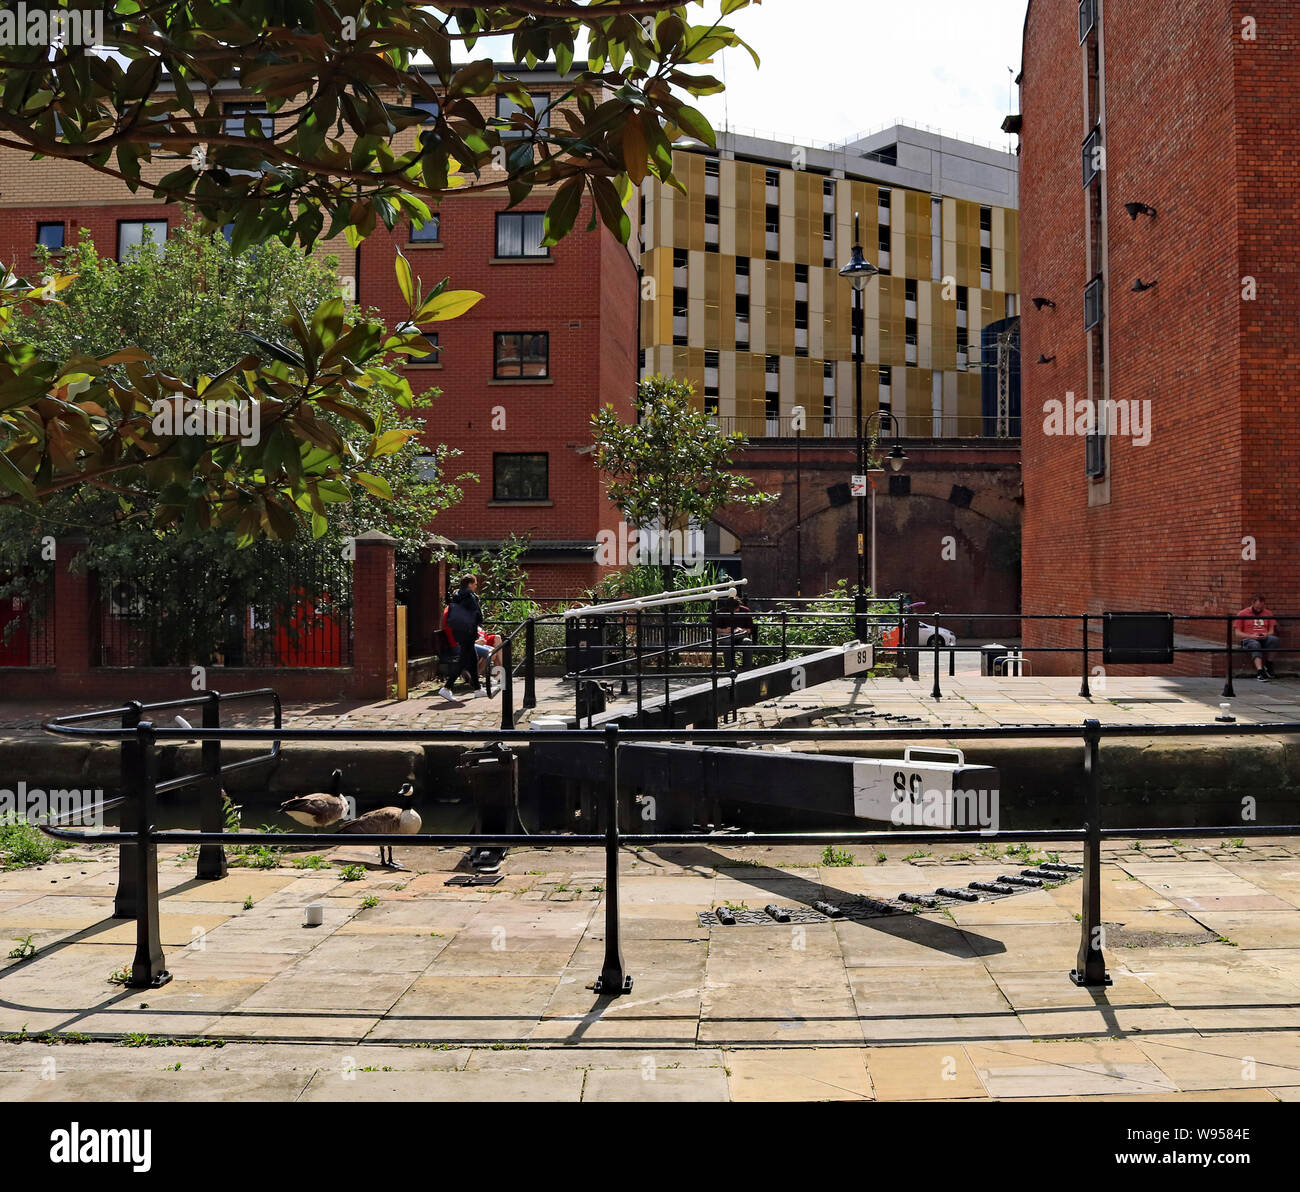 Safety fencing recently installed to deter people from crossing the lock gates on Tib Lock on The Rochdale canal in central Manchester. Stock Photo